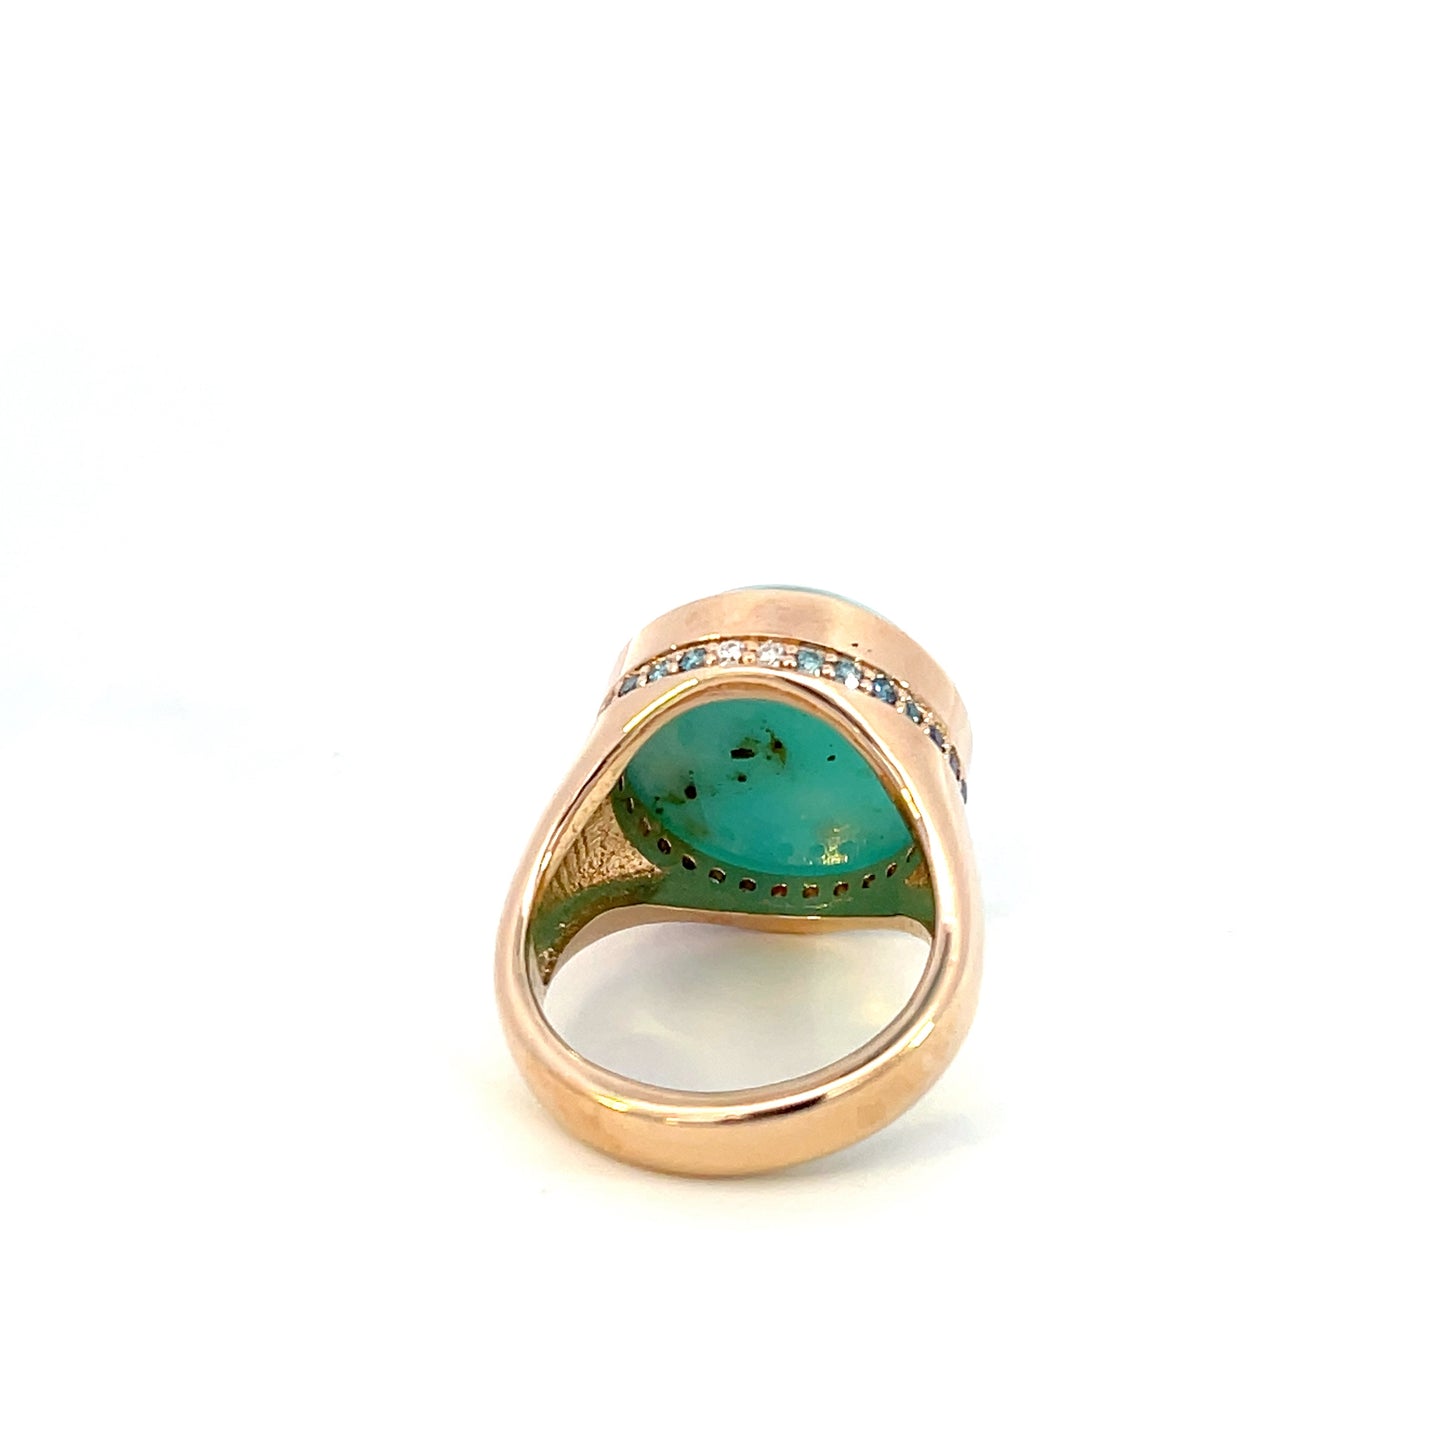 18k Rose Gold Peruvian Opal Ring with a Hidden Halo